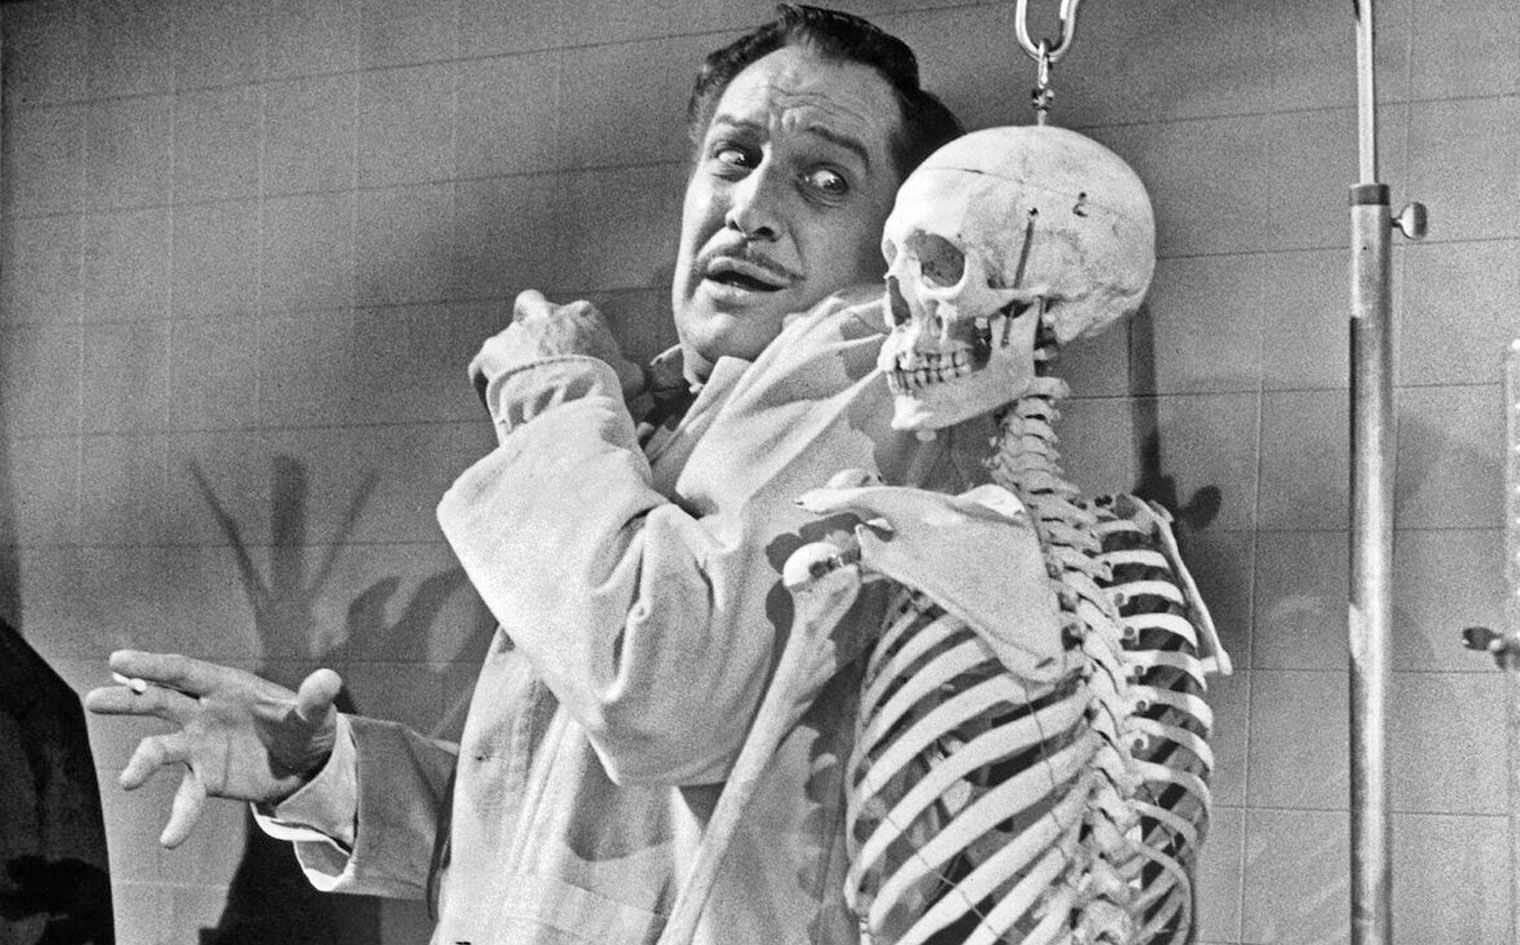 Still from the 1959 film The Tingler of Vincent Price